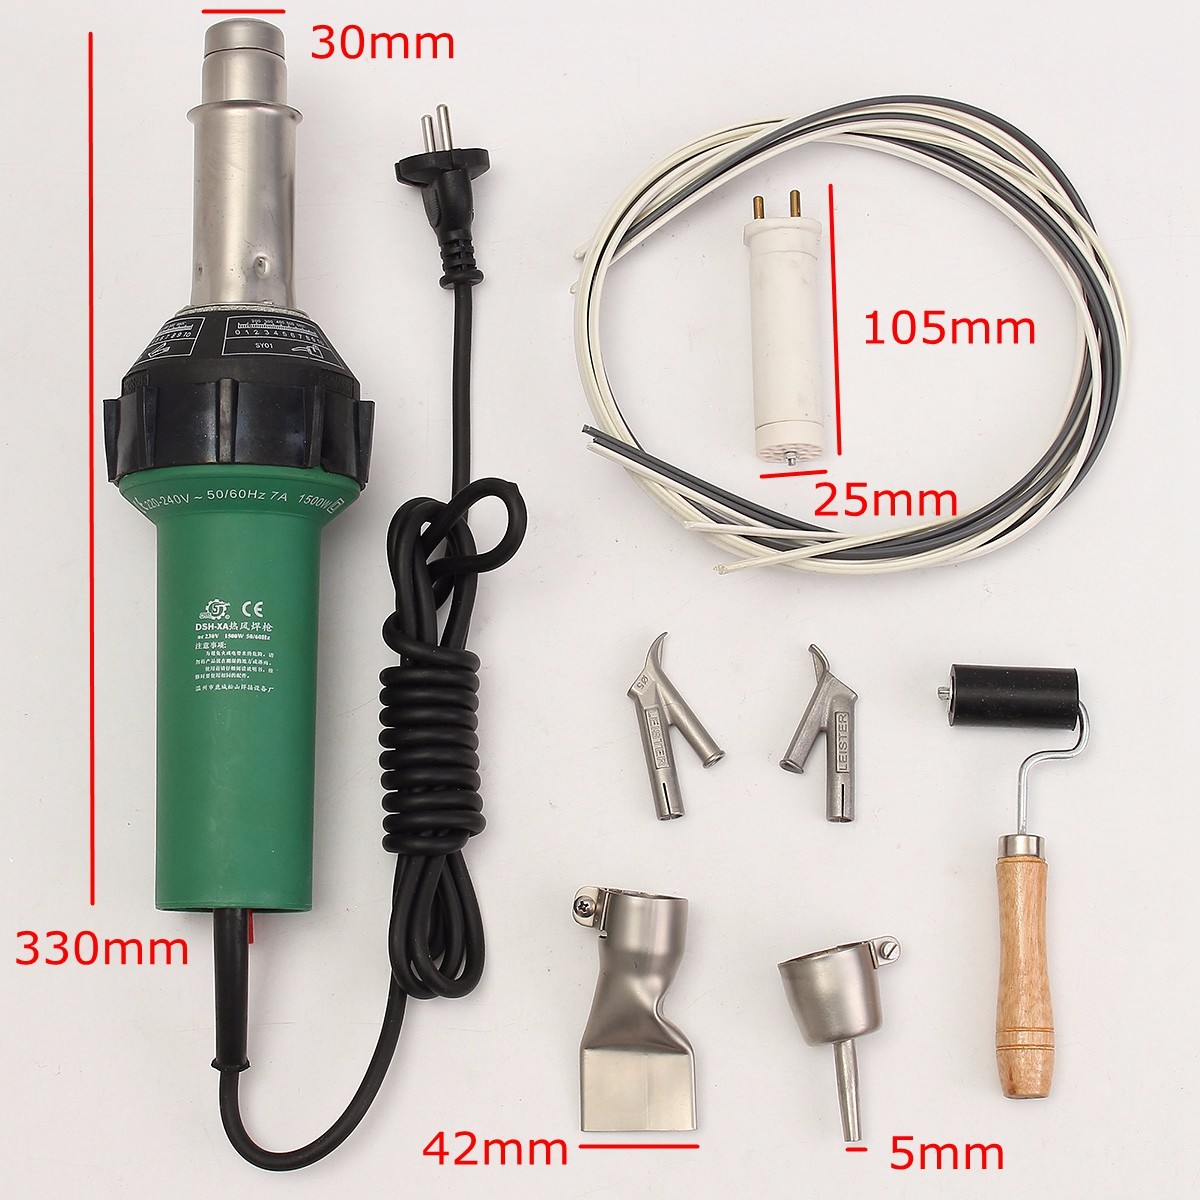 1600W-Plastic-Welding-Hot-Air-Gun-with-2Pcs-Speed-Welding-Nozzle-and-Extra-HE-Rod-Welding-1112868-8